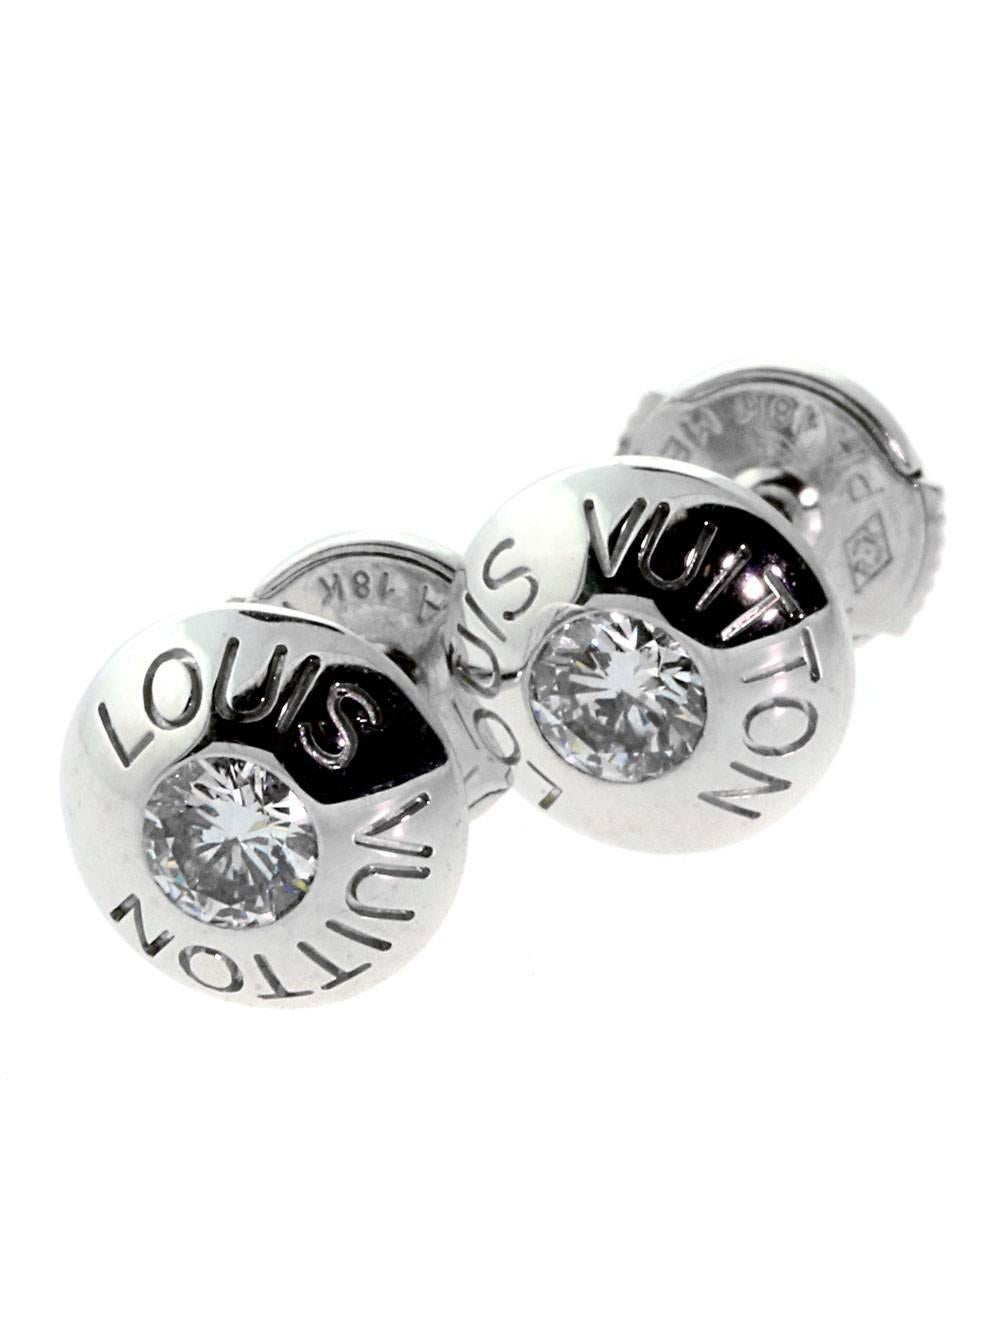 A chic pair of authentic Louis Vuitton diamond earrings crafted in 18k white gold featuring 2 round brilliant cut diamonds.

Diamonds: .30ct total diamond weight
Dimensions: 9MM Wide (.35″ Inches)

Inventory ID: 0000184